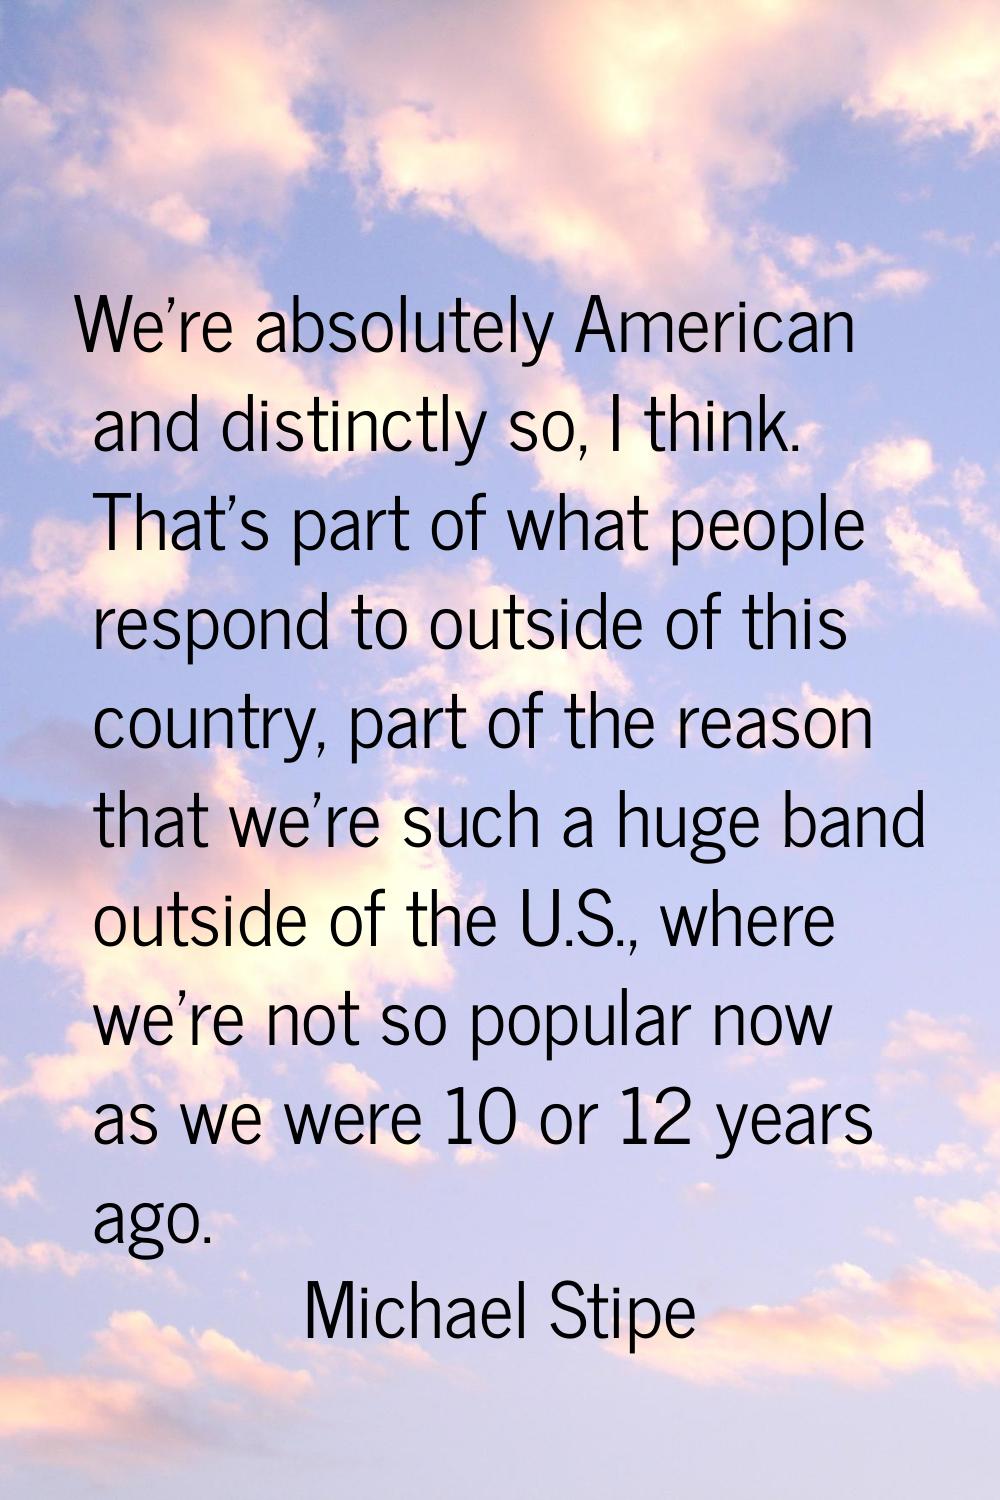 We're absolutely American and distinctly so, I think. That's part of what people respond to outside